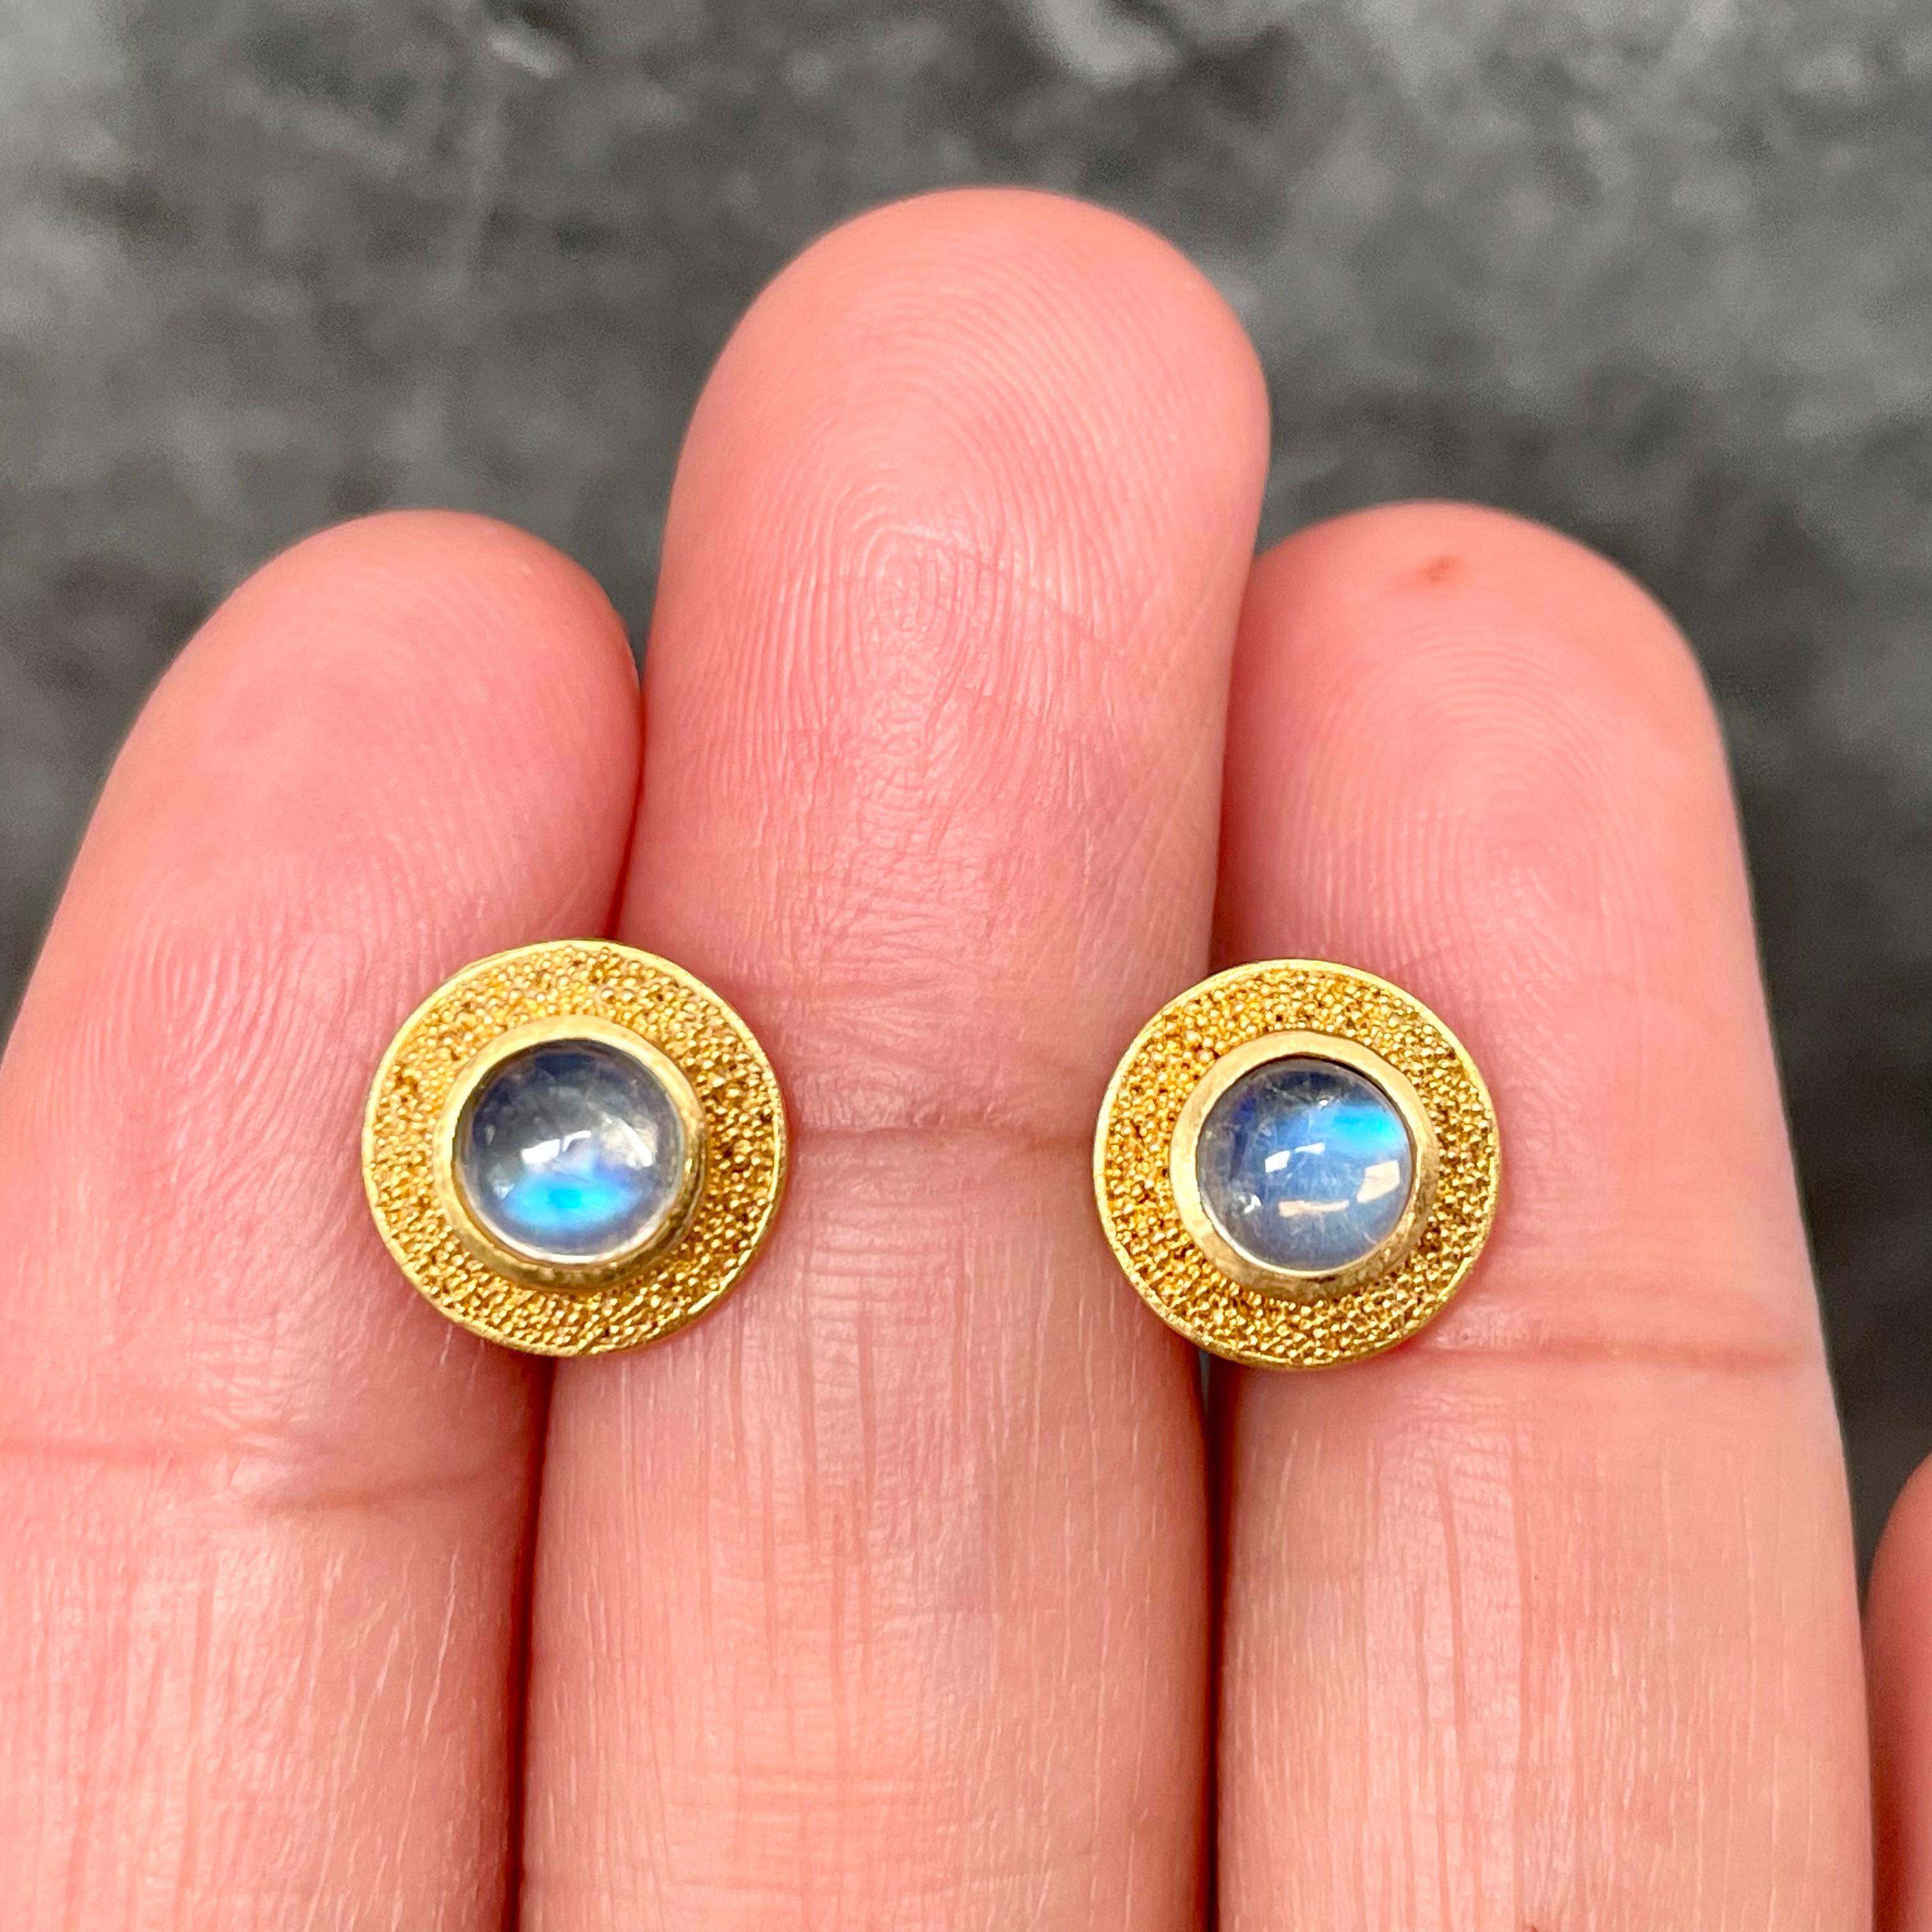 Steven Battelle 1.0 Carats Rainbow Moonstone 22K Gold Post Earrings In New Condition For Sale In Soquel, CA